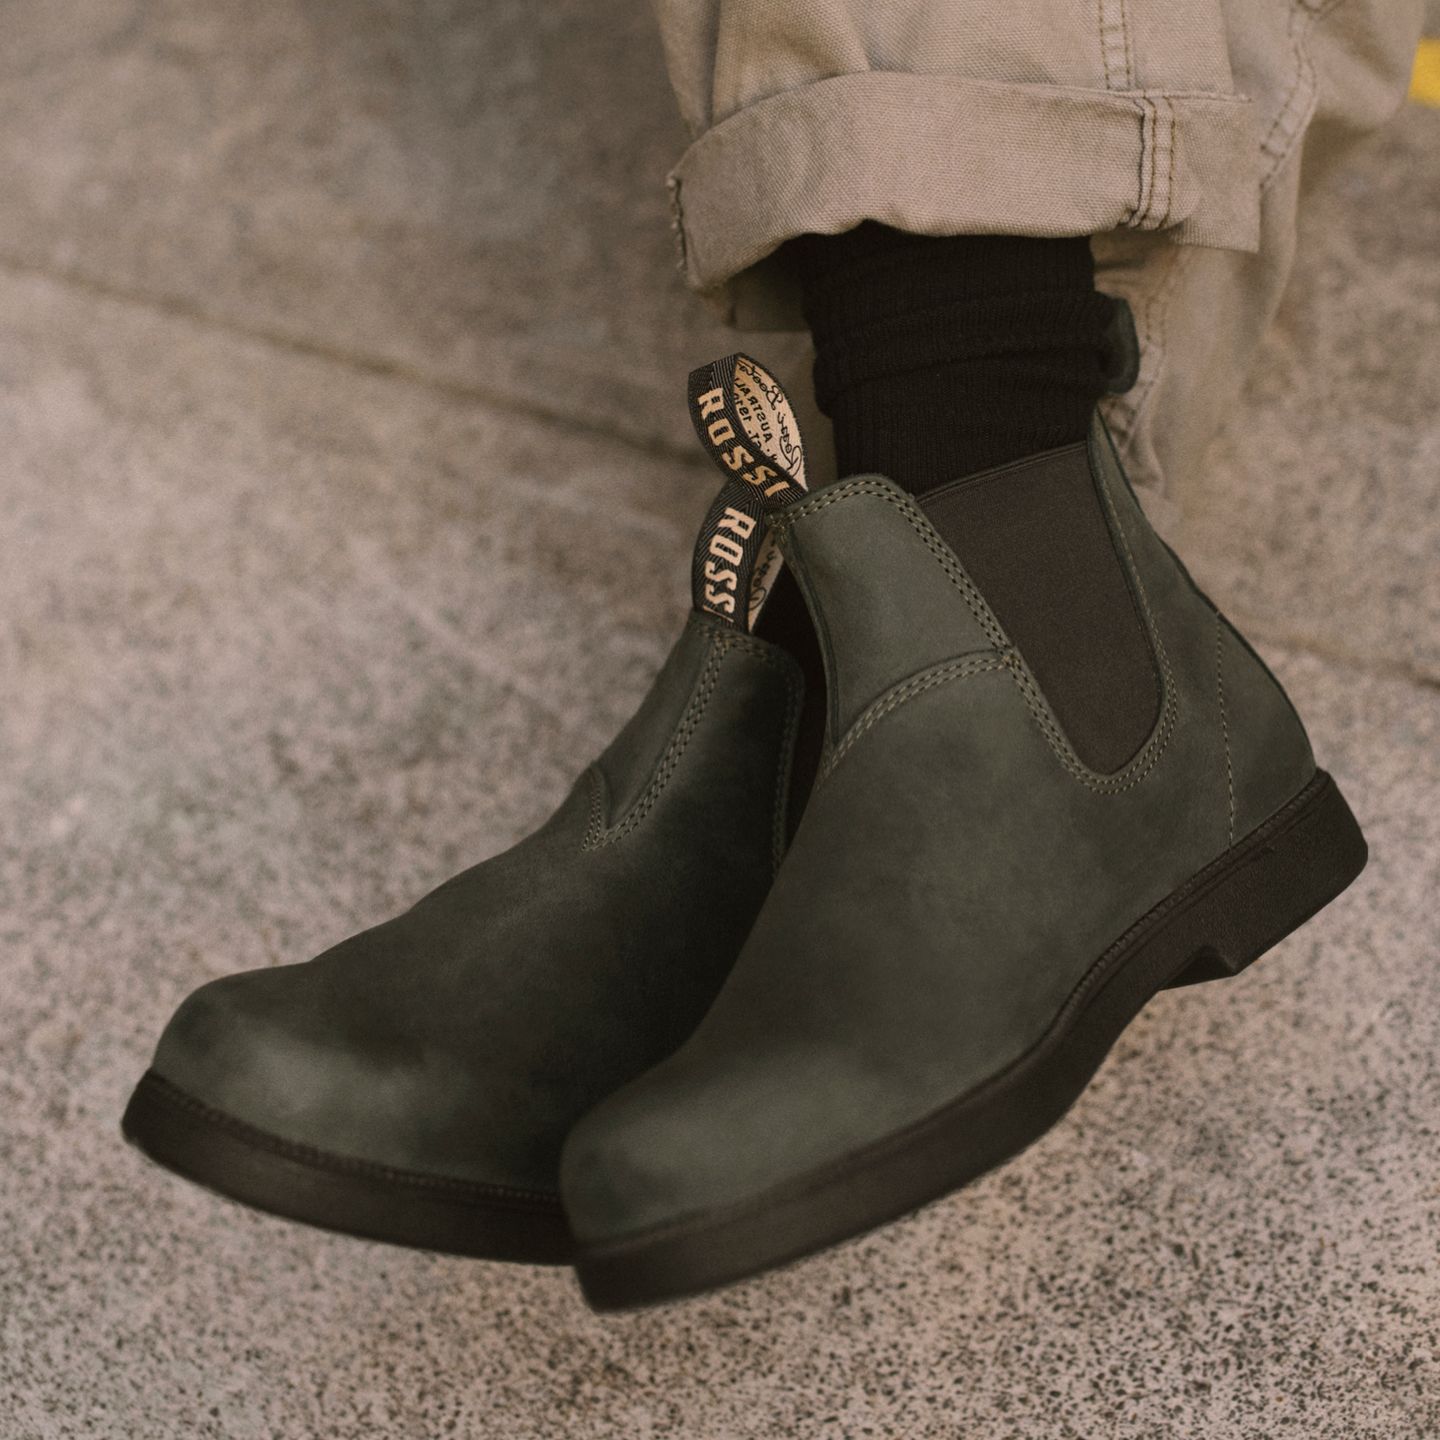 Back in Stock | The Booma in Moss

Perfect for spending a day in the dirt o...

Shop the Booma range via the link in bio. 

#RossiBoots